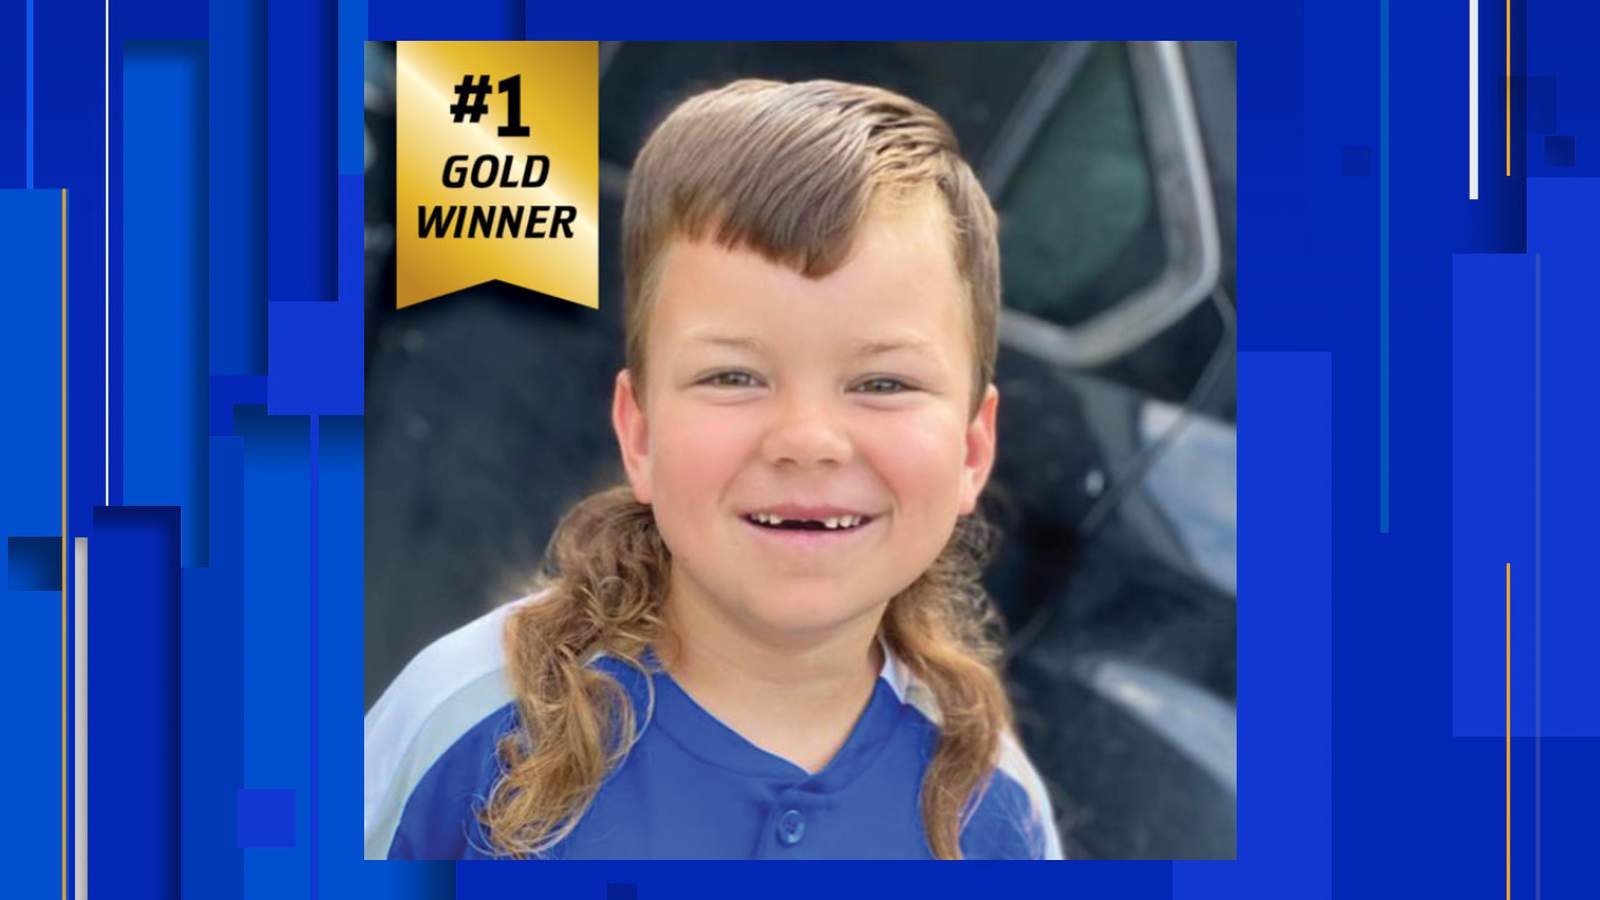 Texas boy wins first place in kids category for best mullet in the country